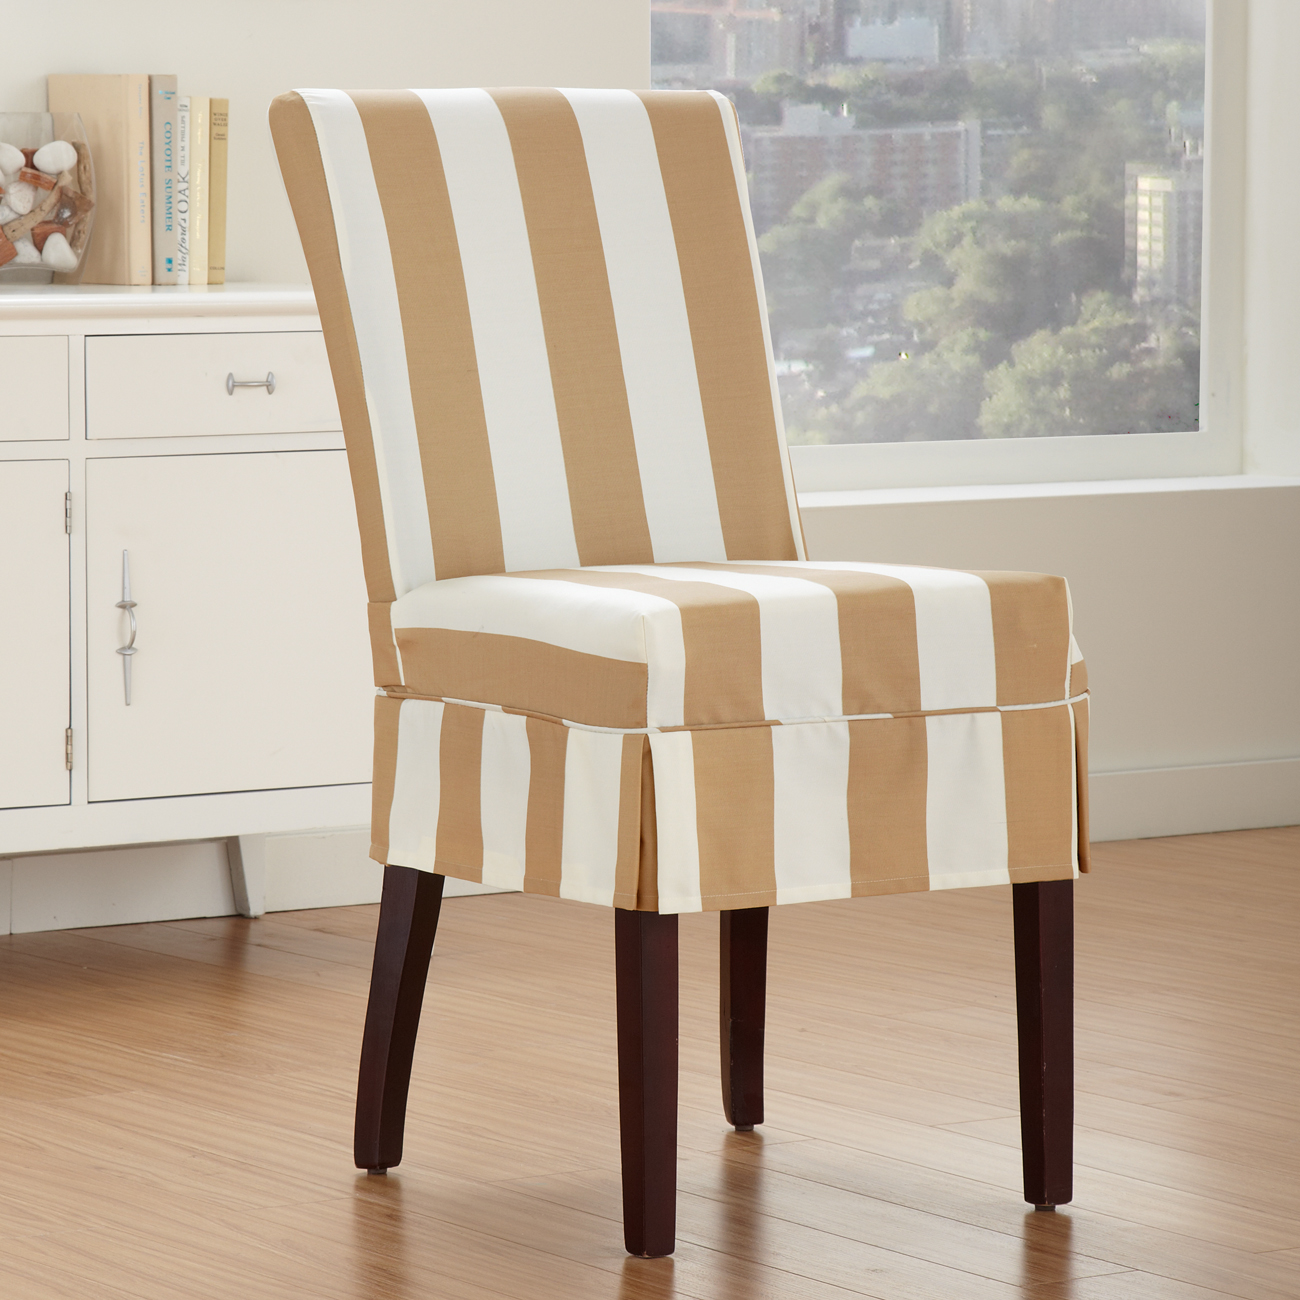 dining chair slip covers photo - 1